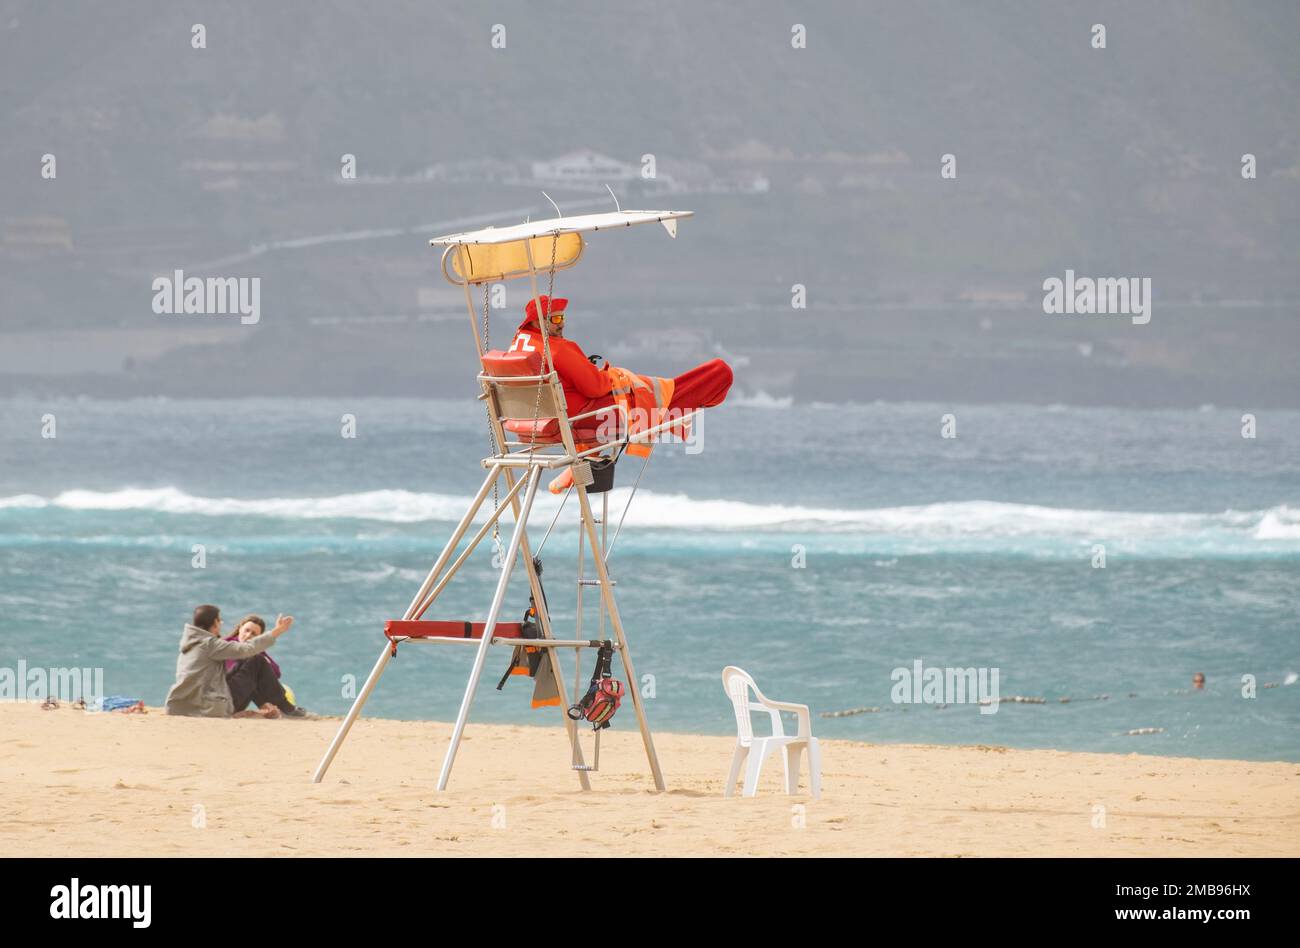 Las Palmas, Gran Canaria, Canary Islands, Spain. 20th January 2023. Cooler weather for British tourists (and lifeguards) on the city beach in Las Palmas on Gran Canaria as a cold front brings rain, strong winds, and lower temperatures to the Canary Islands. Credit: Alan Dawson/Alamy Live News Stock Photo